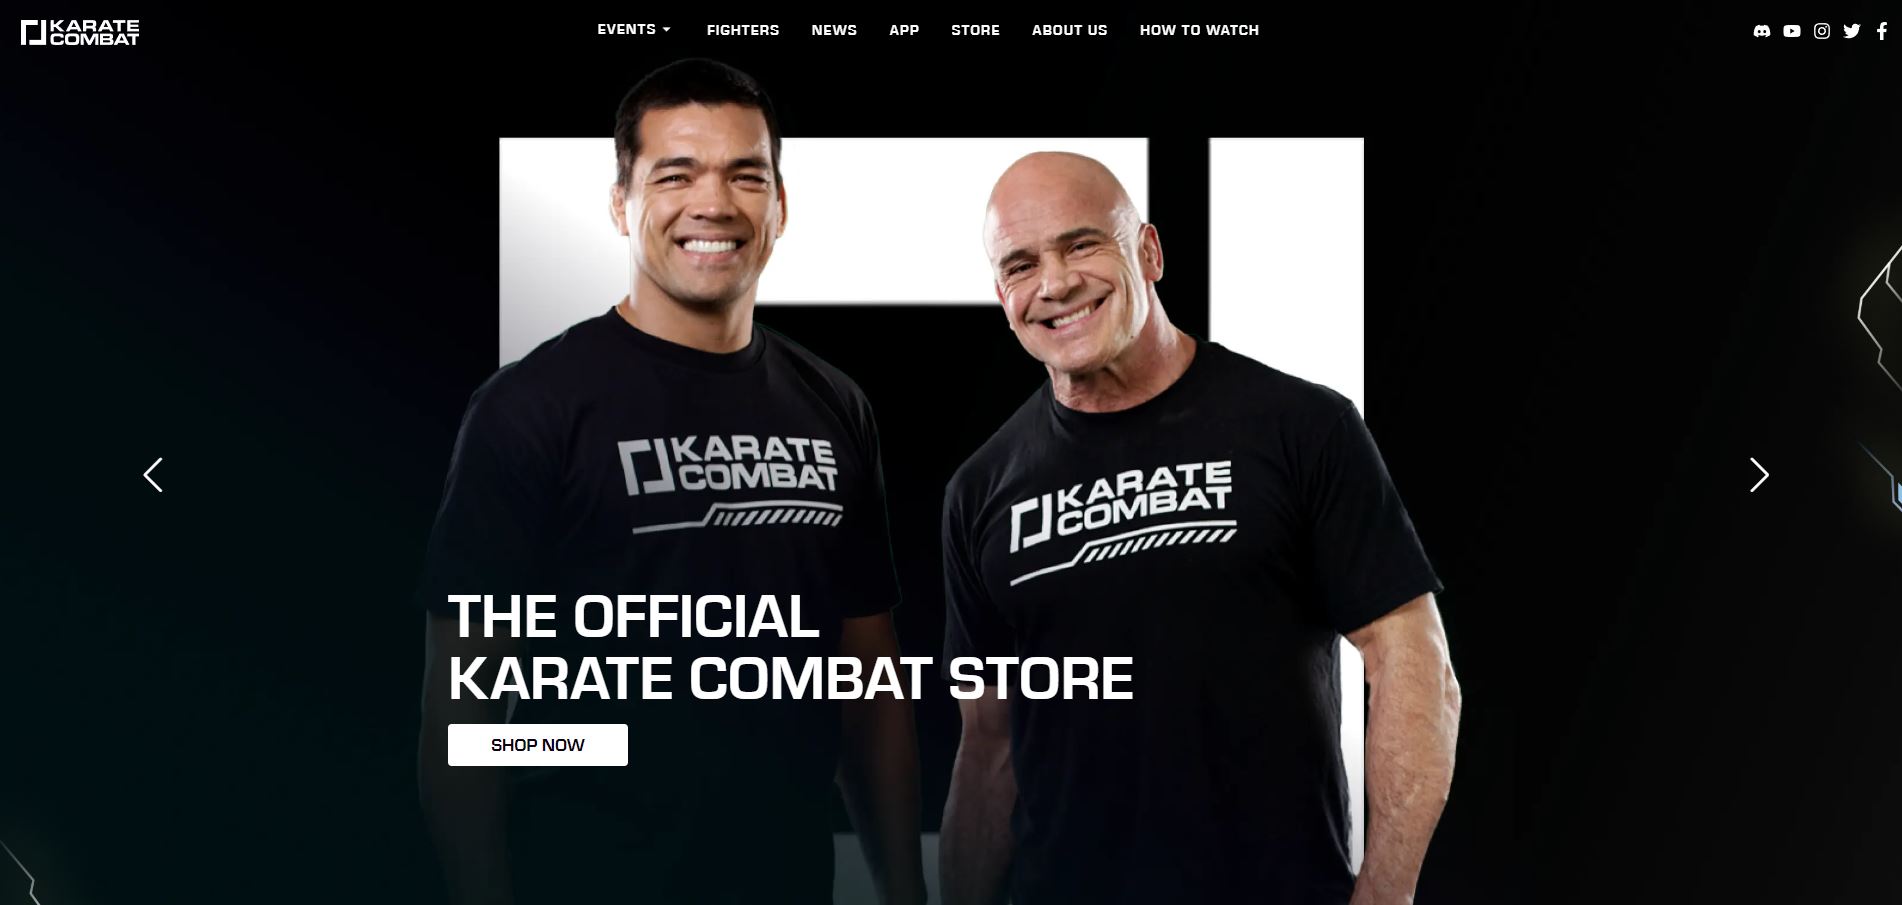 Karate Combat, this UK-based startup has raised a whopping $18 million from investors.